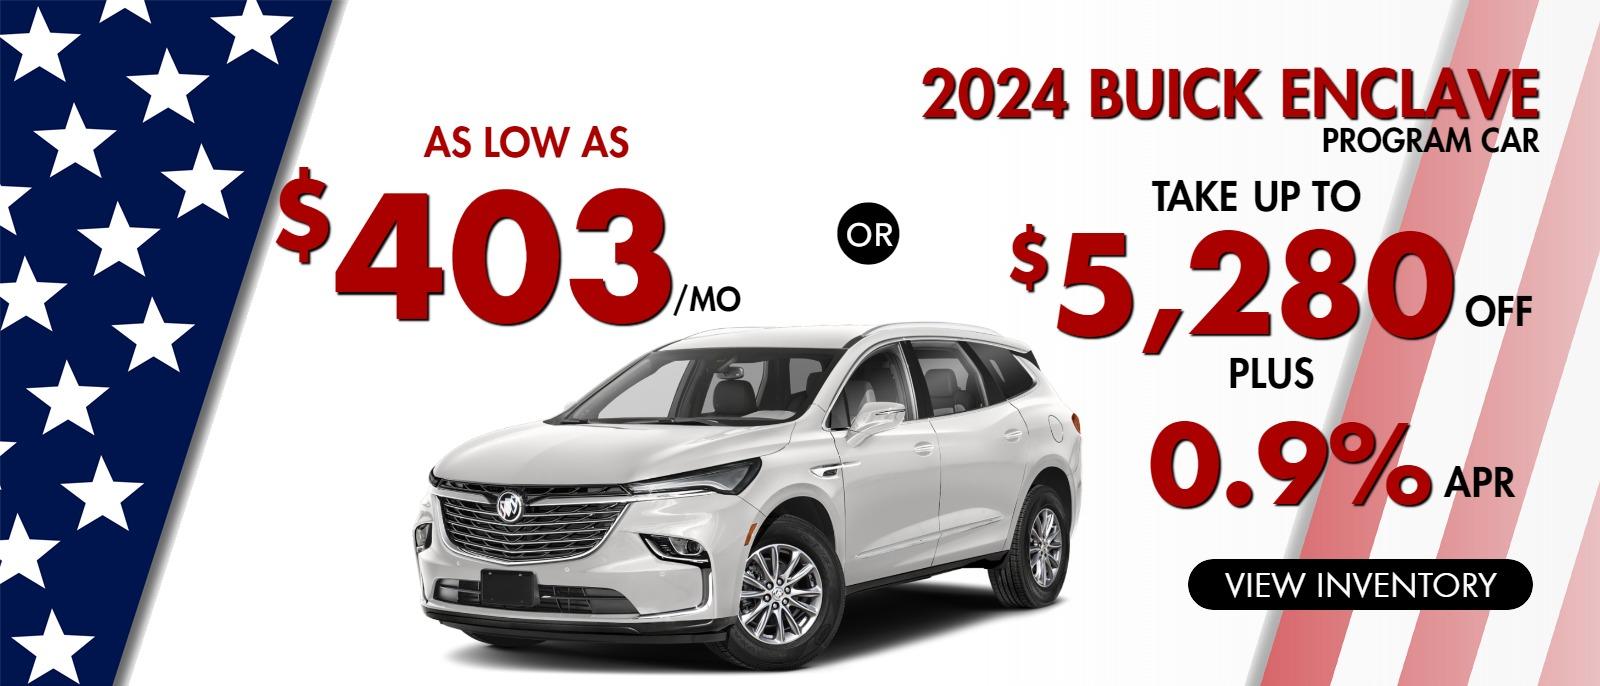 2024 Buick Enclave
Stock  L0448
AS LOW AS
$403/mo
     OR                                                    
take up to $5280 OFF   
Plus
0.9% finance